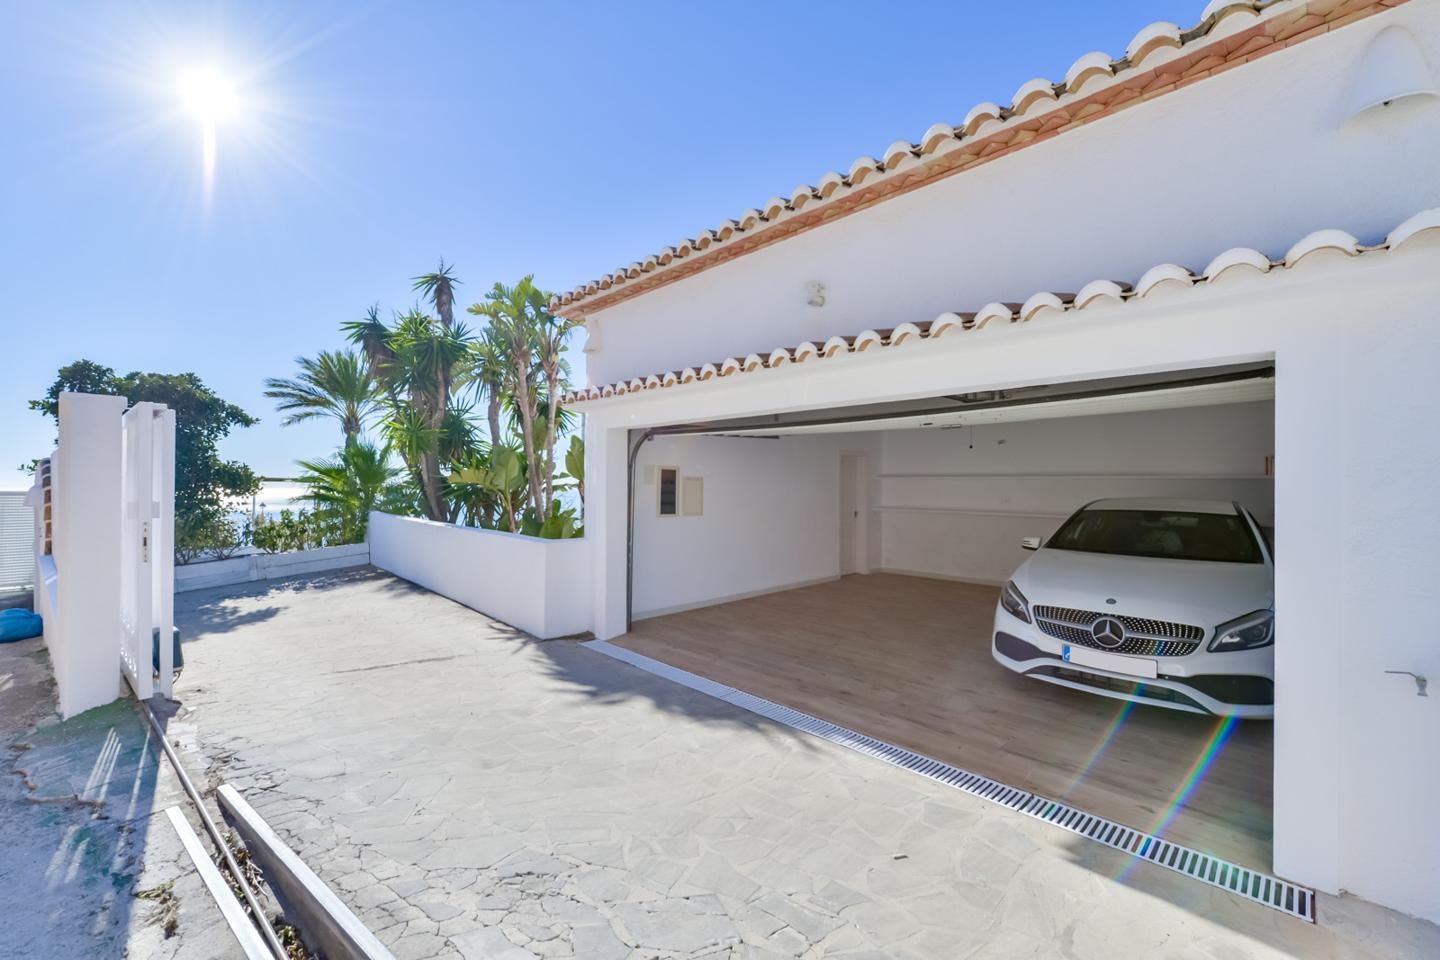 This villa is at Altea Hills, . It is a villa that has 939 m2 of which 285 m2 are